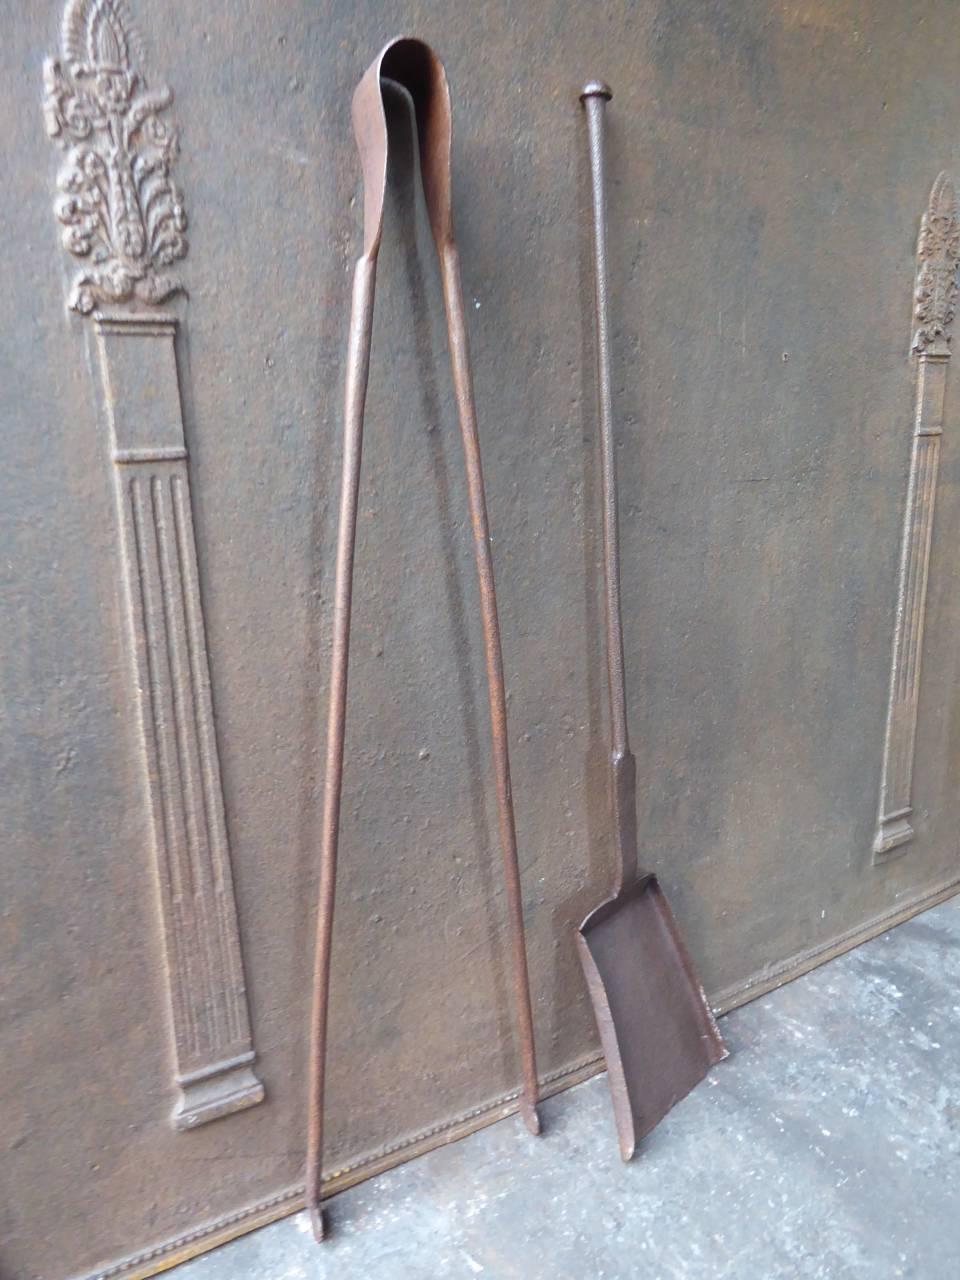 18th century French fire tools - fire irons made of wrought iron.

We have a unique and specialized collection of antique and used fireplace accessories consisting of more than 1000 listings at 1stdibs. Amongst others, we always have 300+ firebacks,